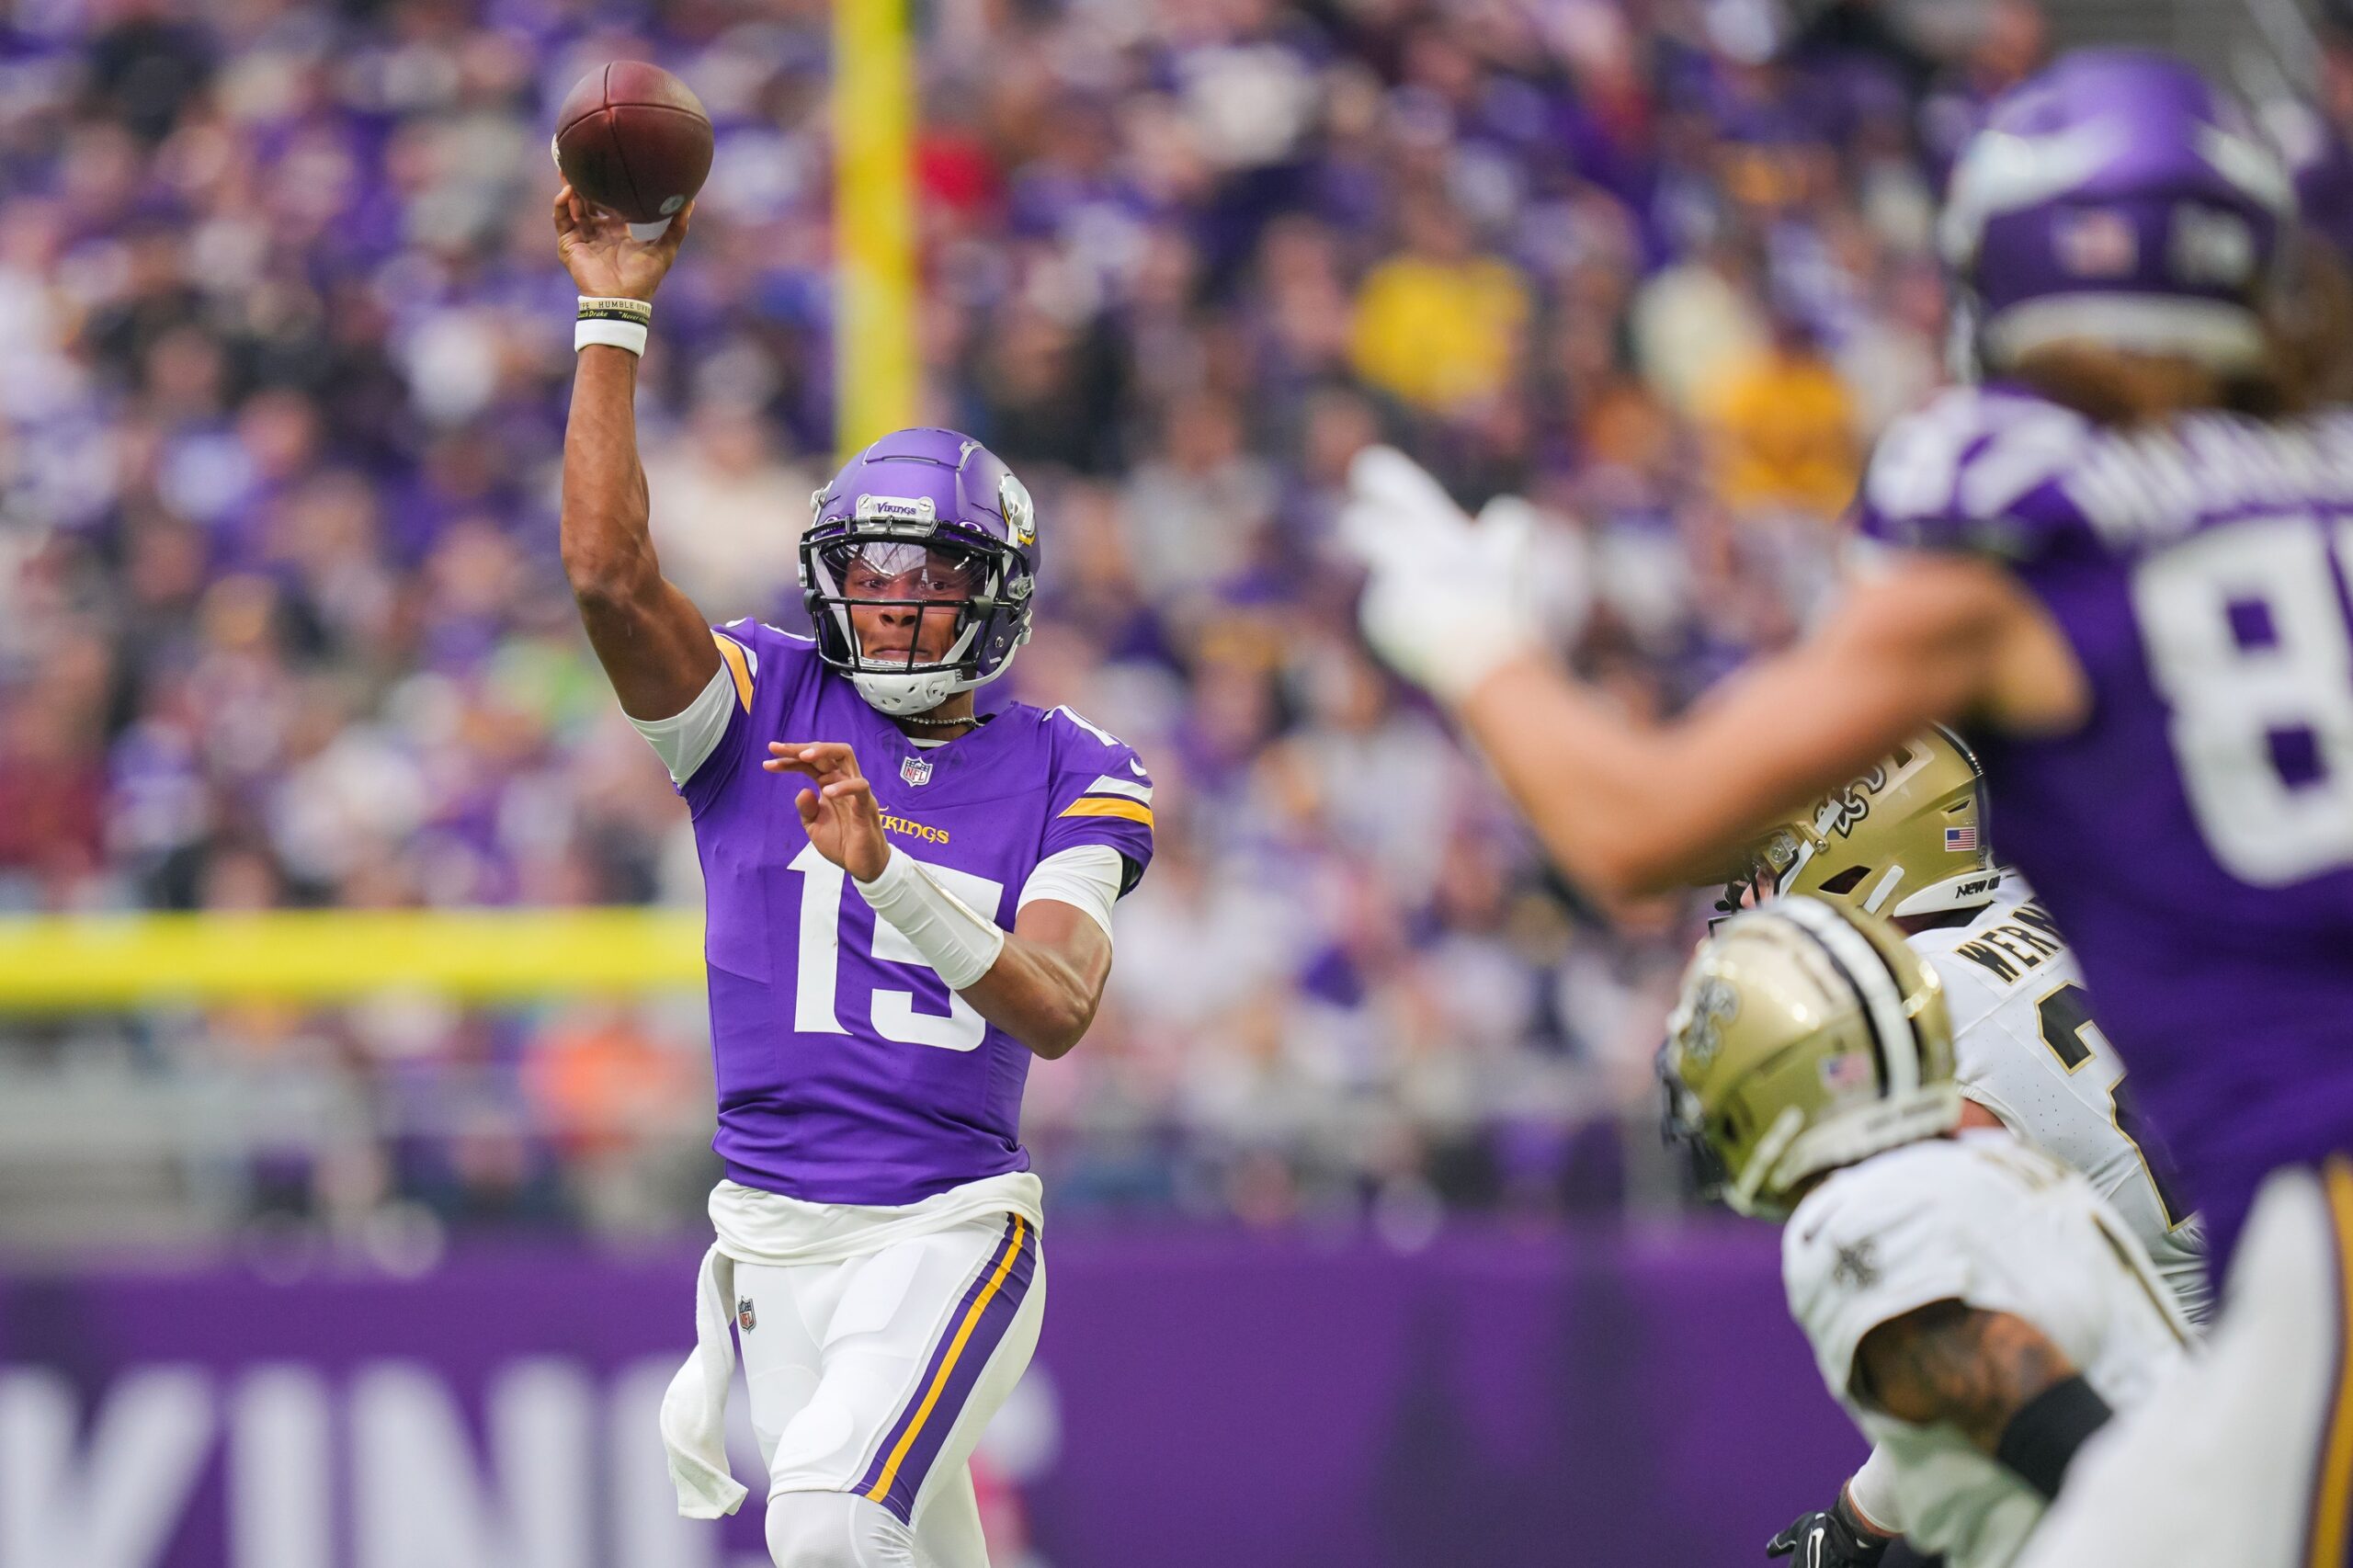 Vikings vs. Saints: 5 things you can count on - Sports Illustrated  Minnesota Sports, News, Analysis, and More